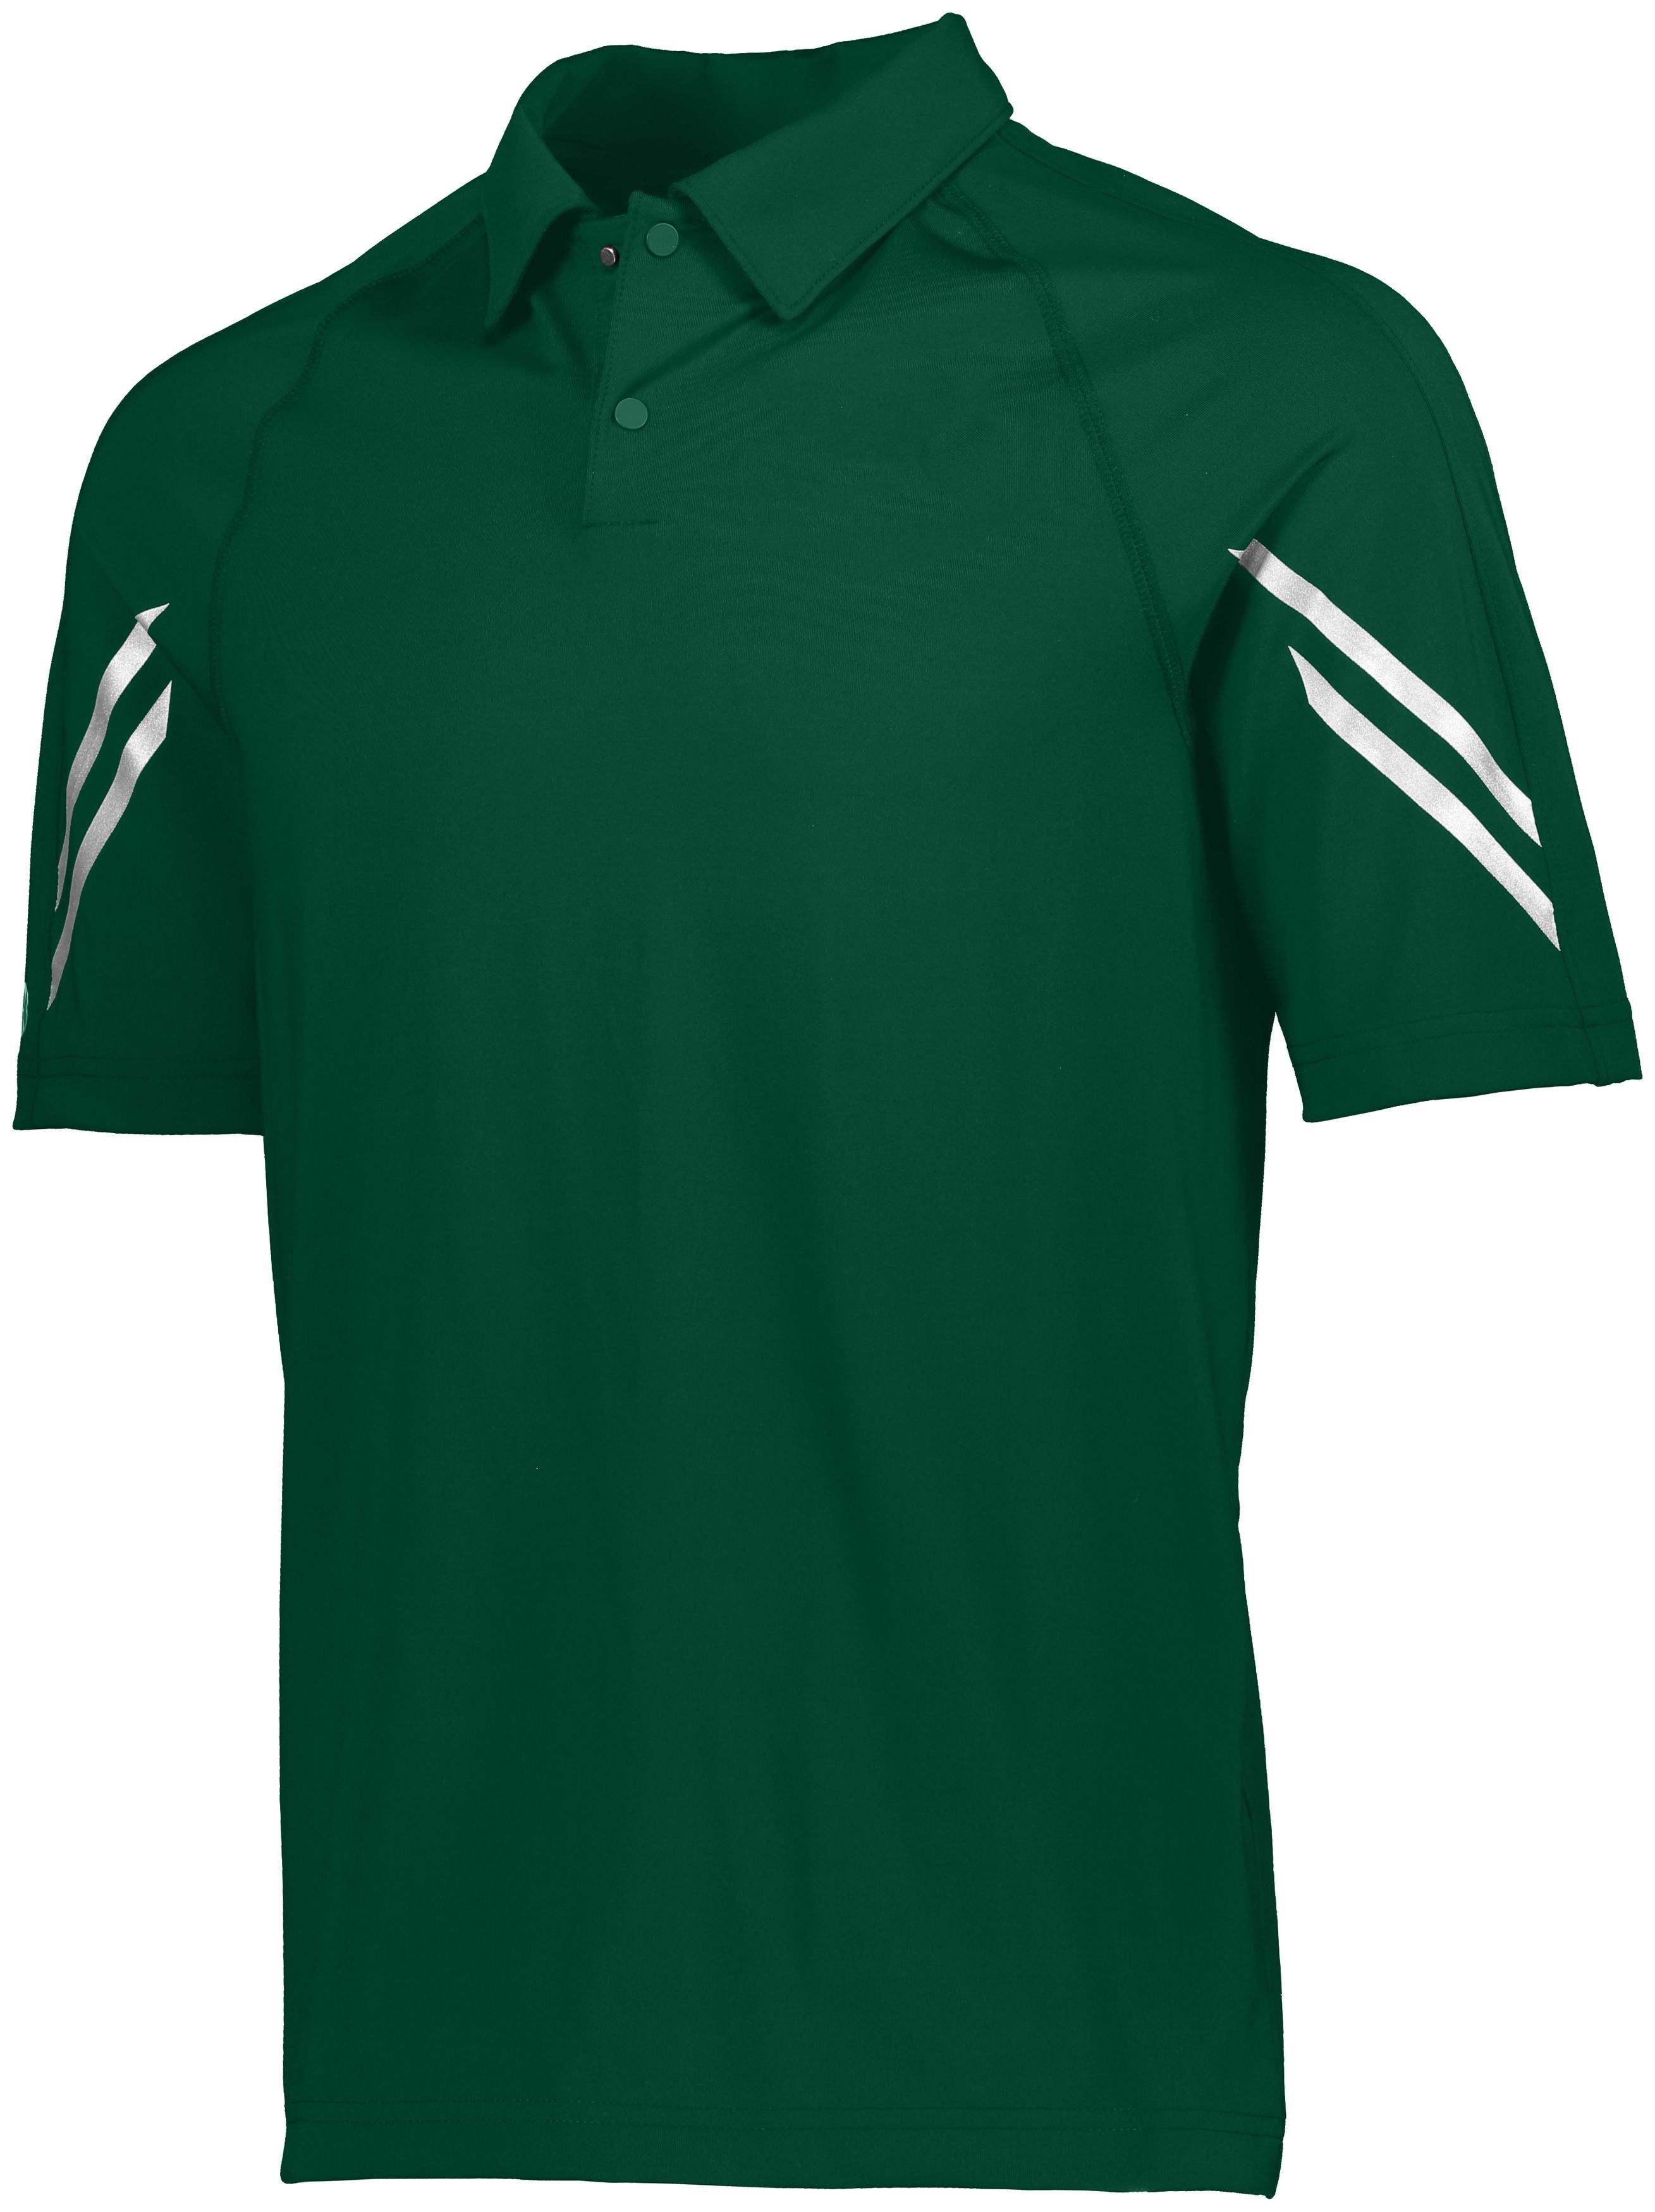 Holloway Flux Polo in Forest  -Part of the Adult, Adult-Polos, Polos, Holloway, Shirts, Flux-Collection, Corporate-Collection product lines at KanaleyCreations.com